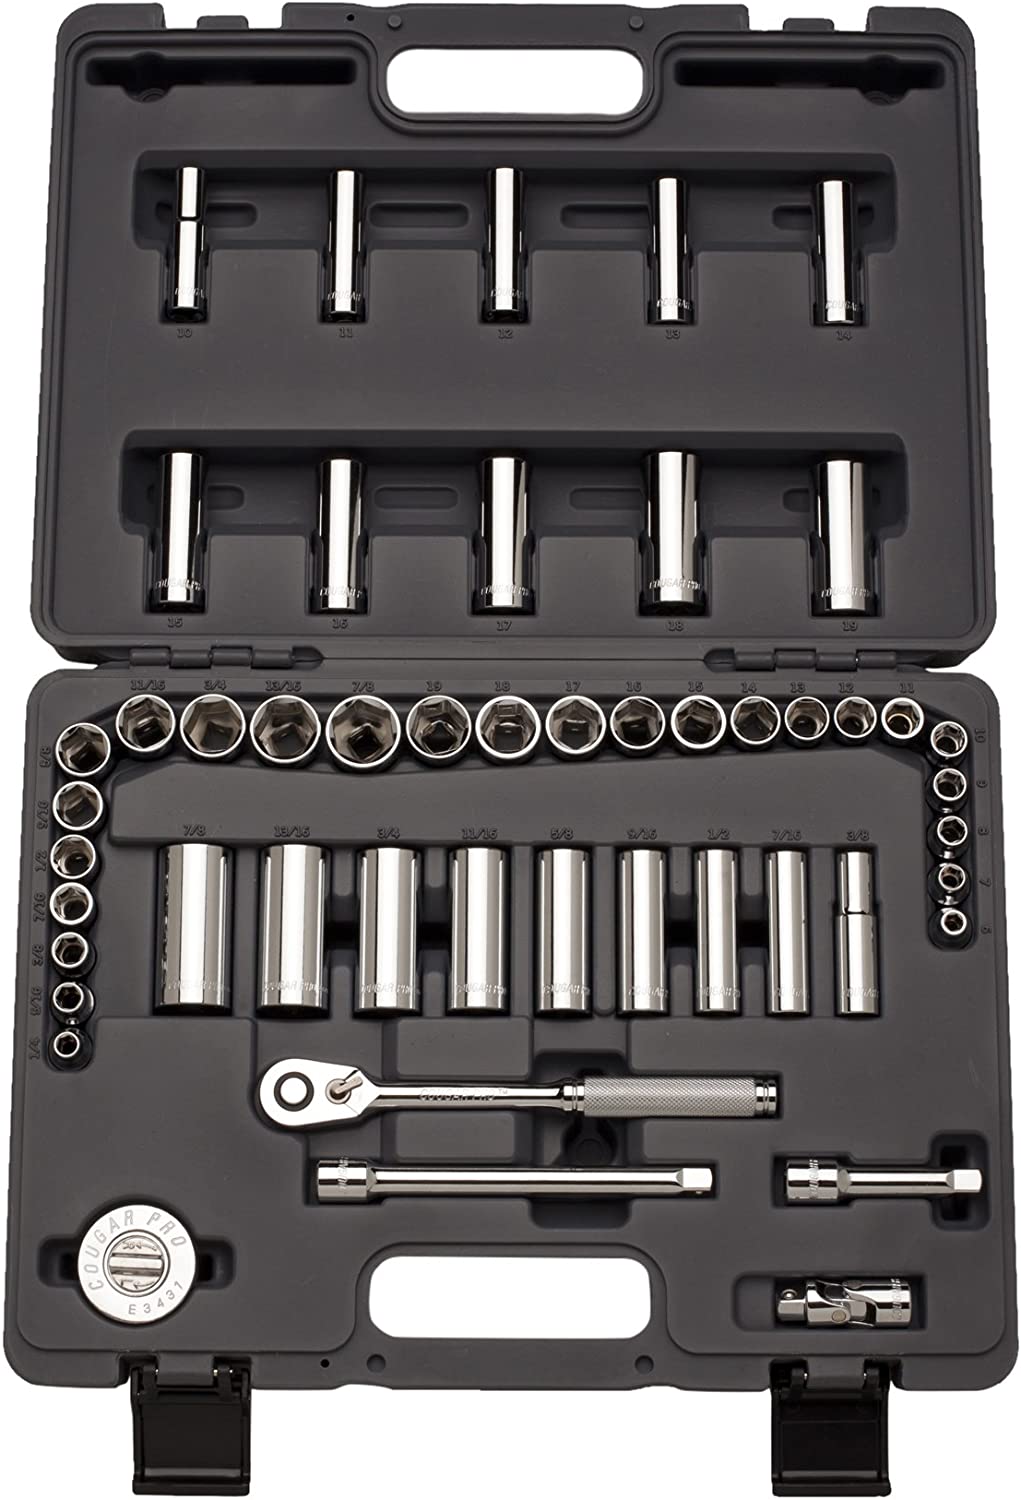 Cougar Pro Socket Wrench Box Set 49 Pieces 3/8" Drive Metric/SAE A39